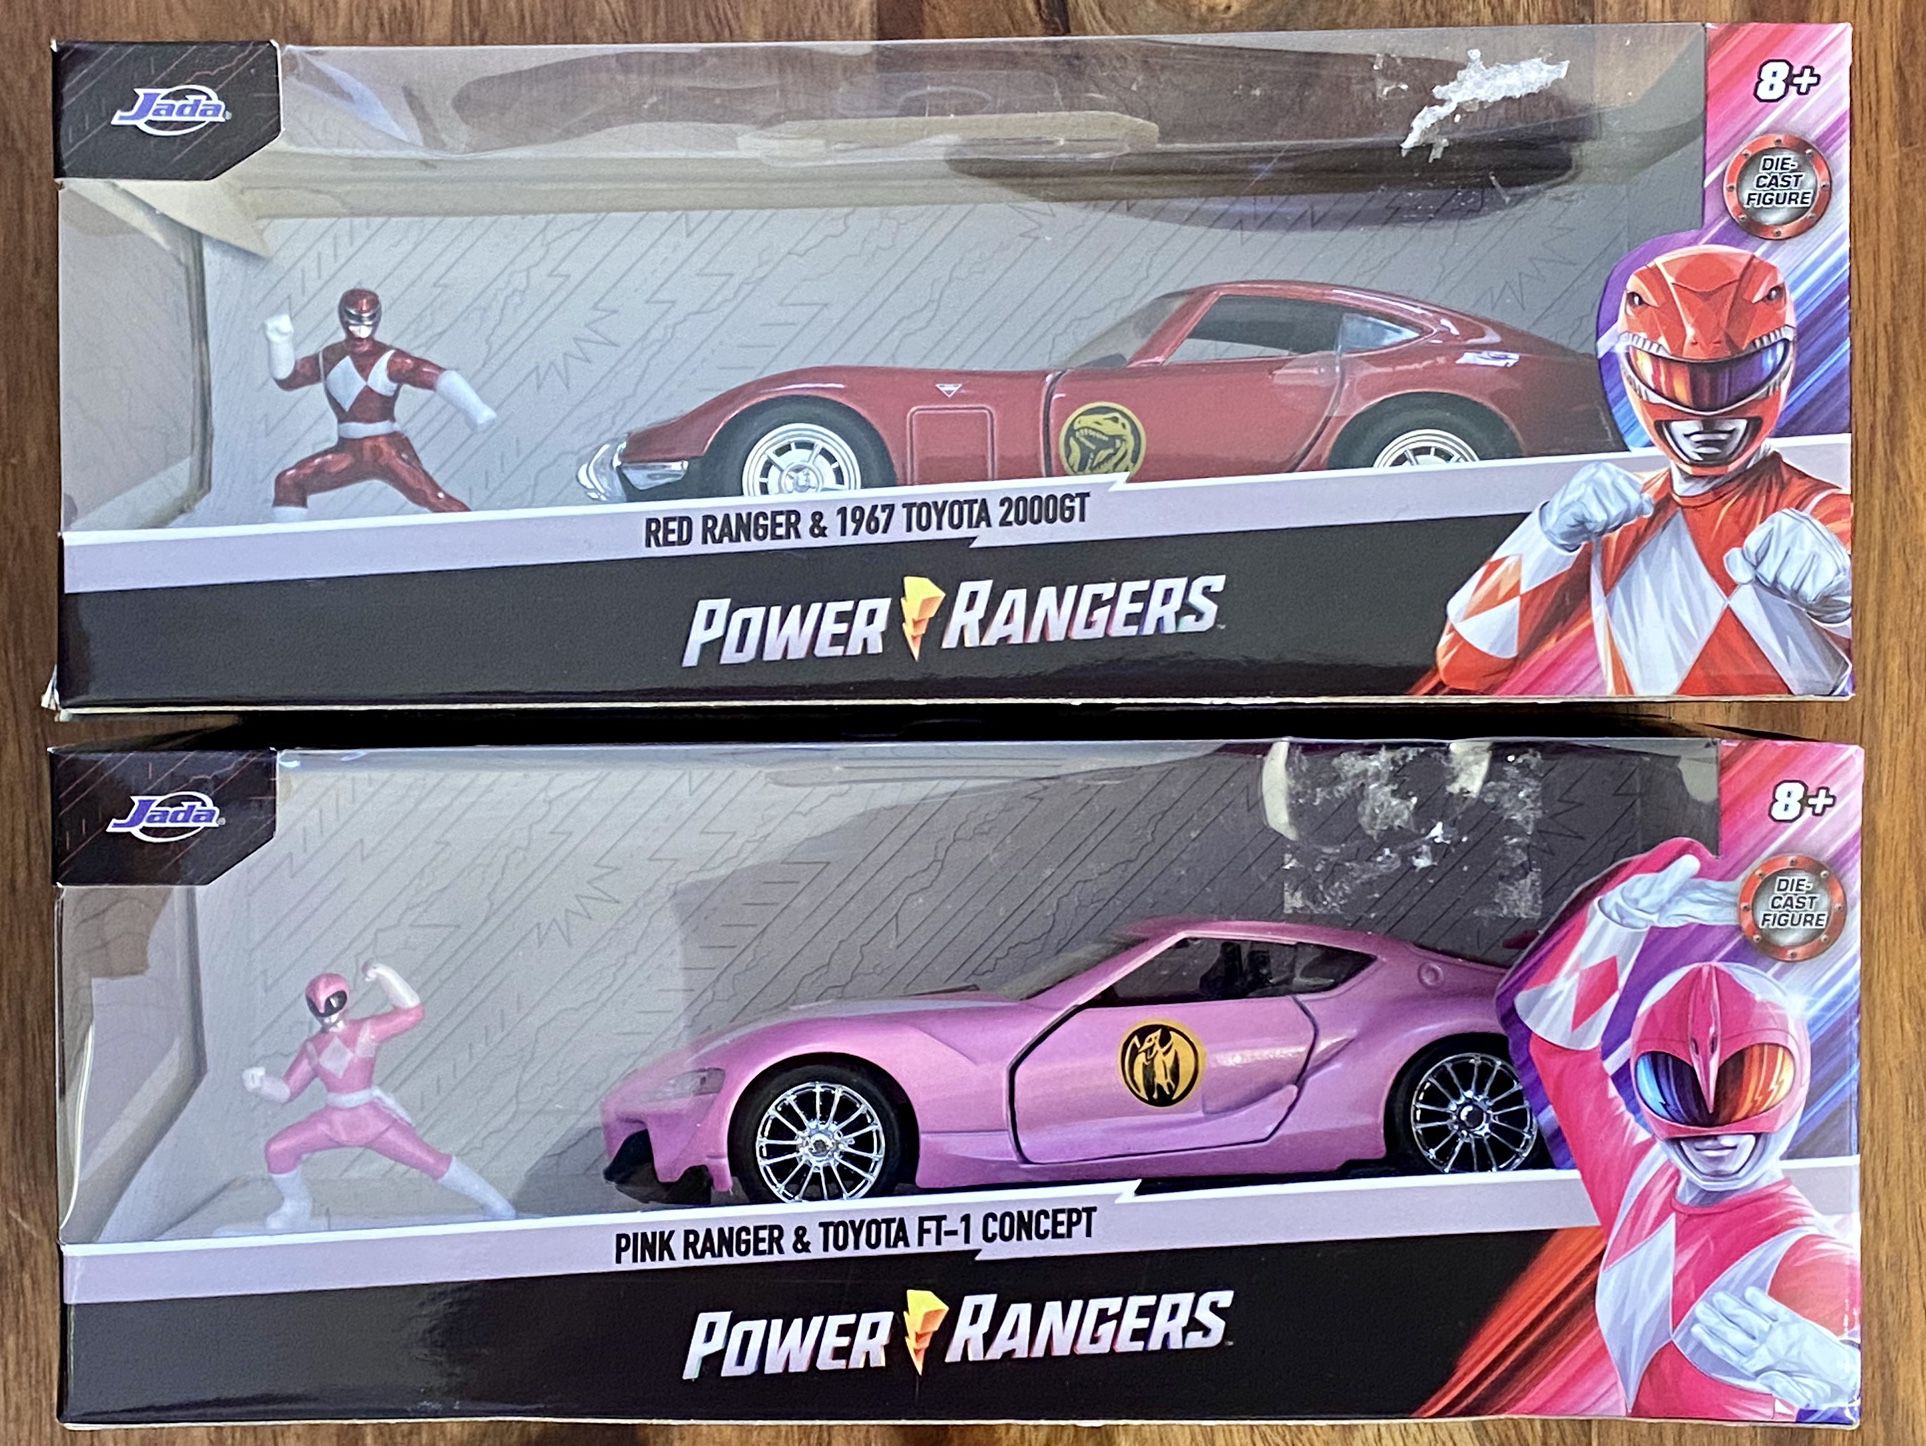 Power Rangers with Cars